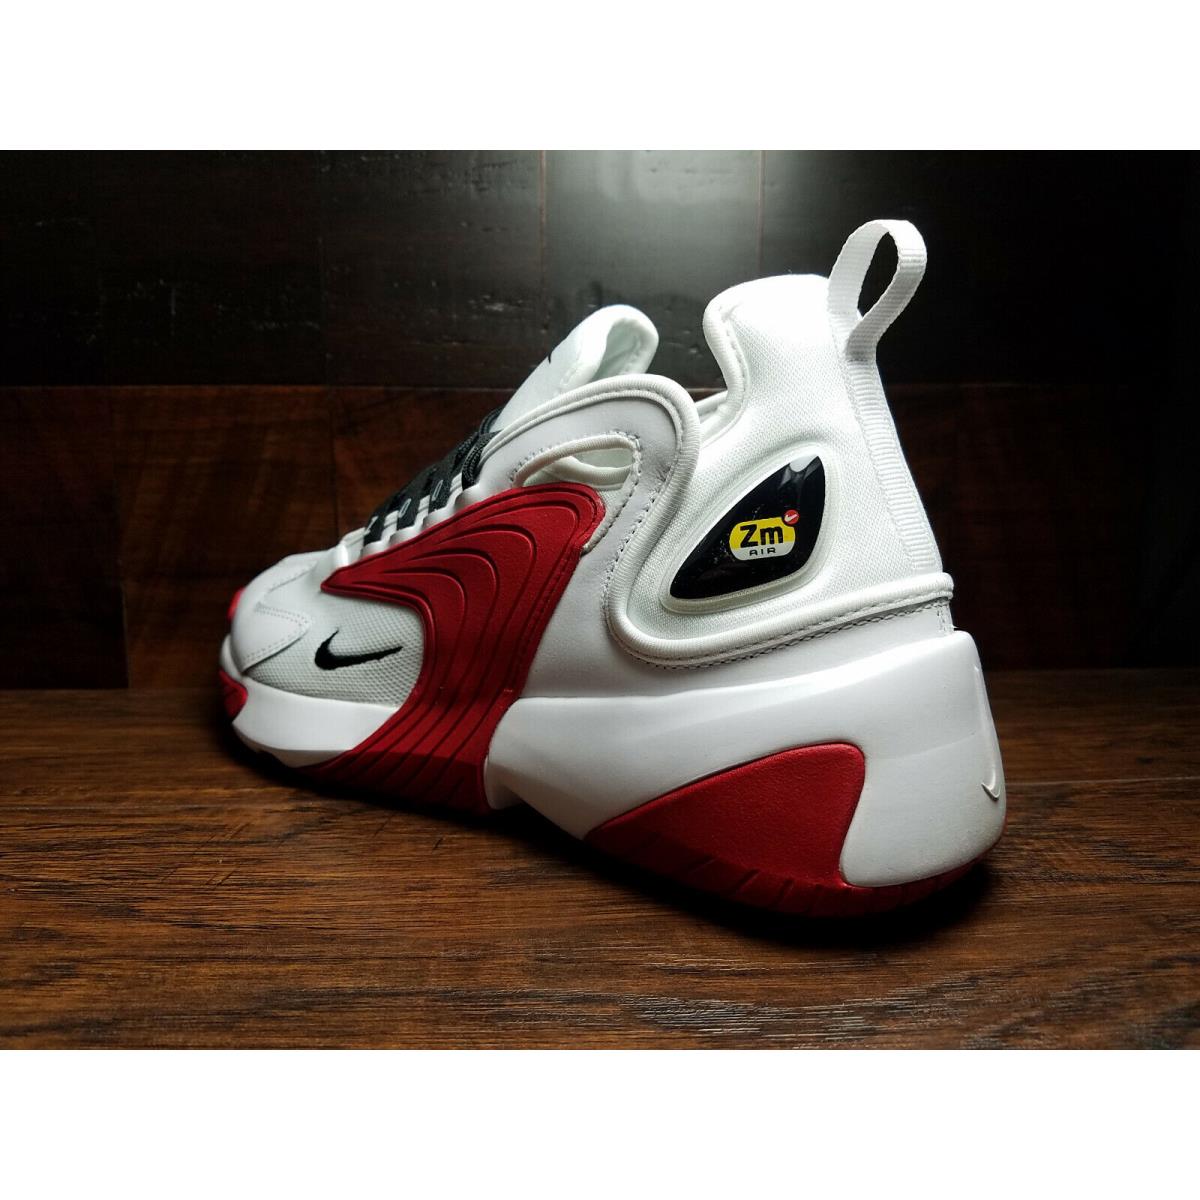 Nike shoes Zoom - White / Black / Red 2